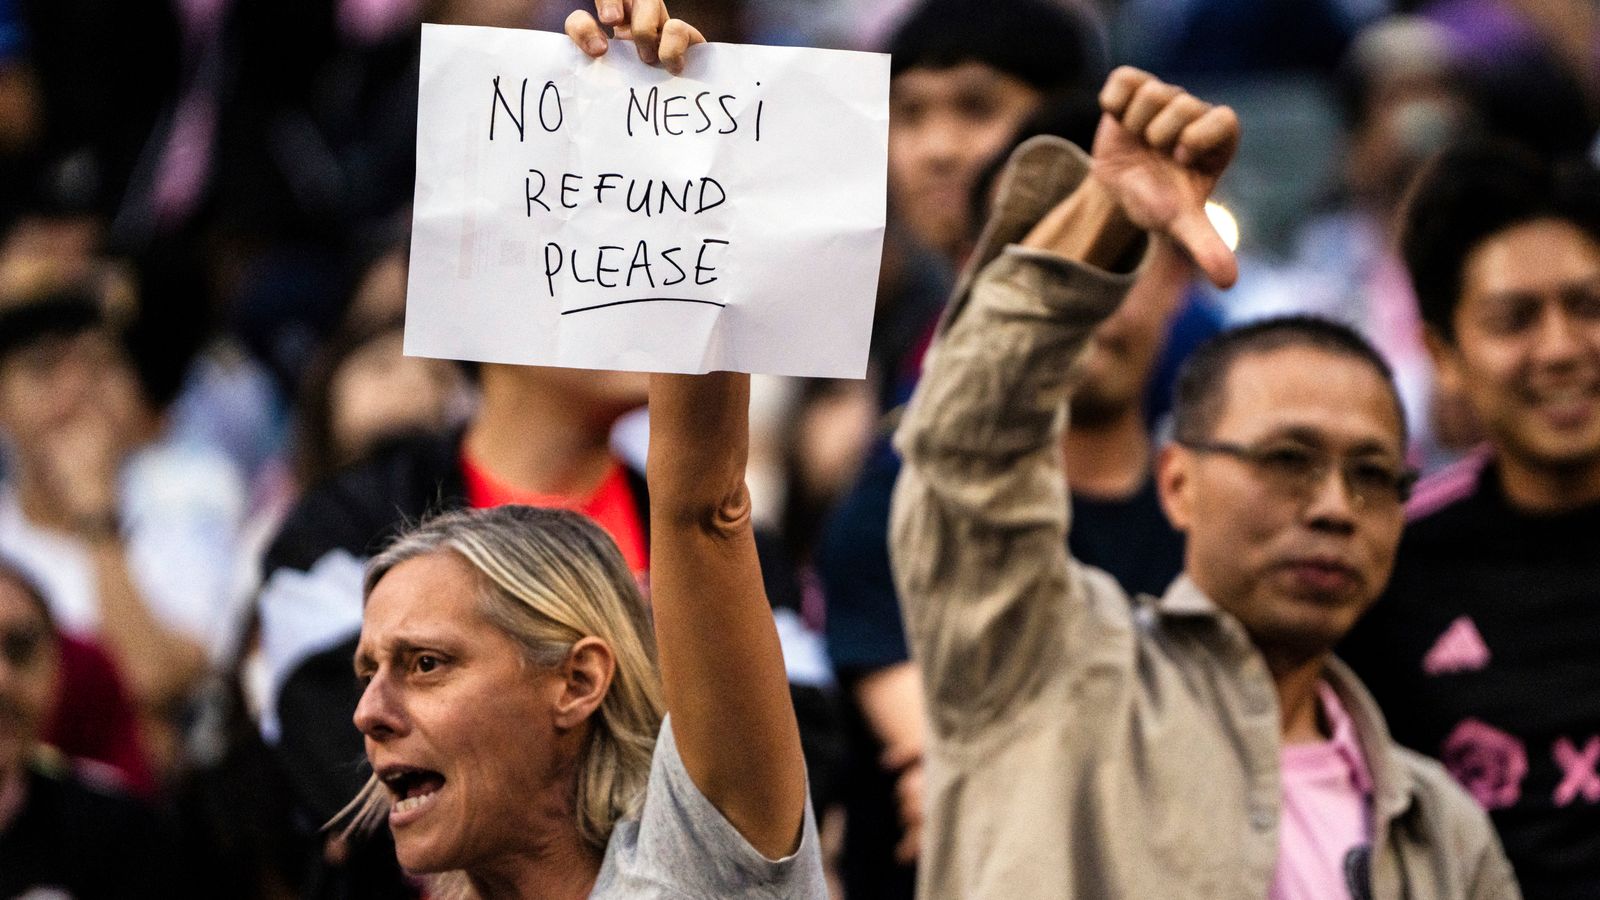 David Beckham booed and angry fans demand refund after Lionel Messi sits out match | World News